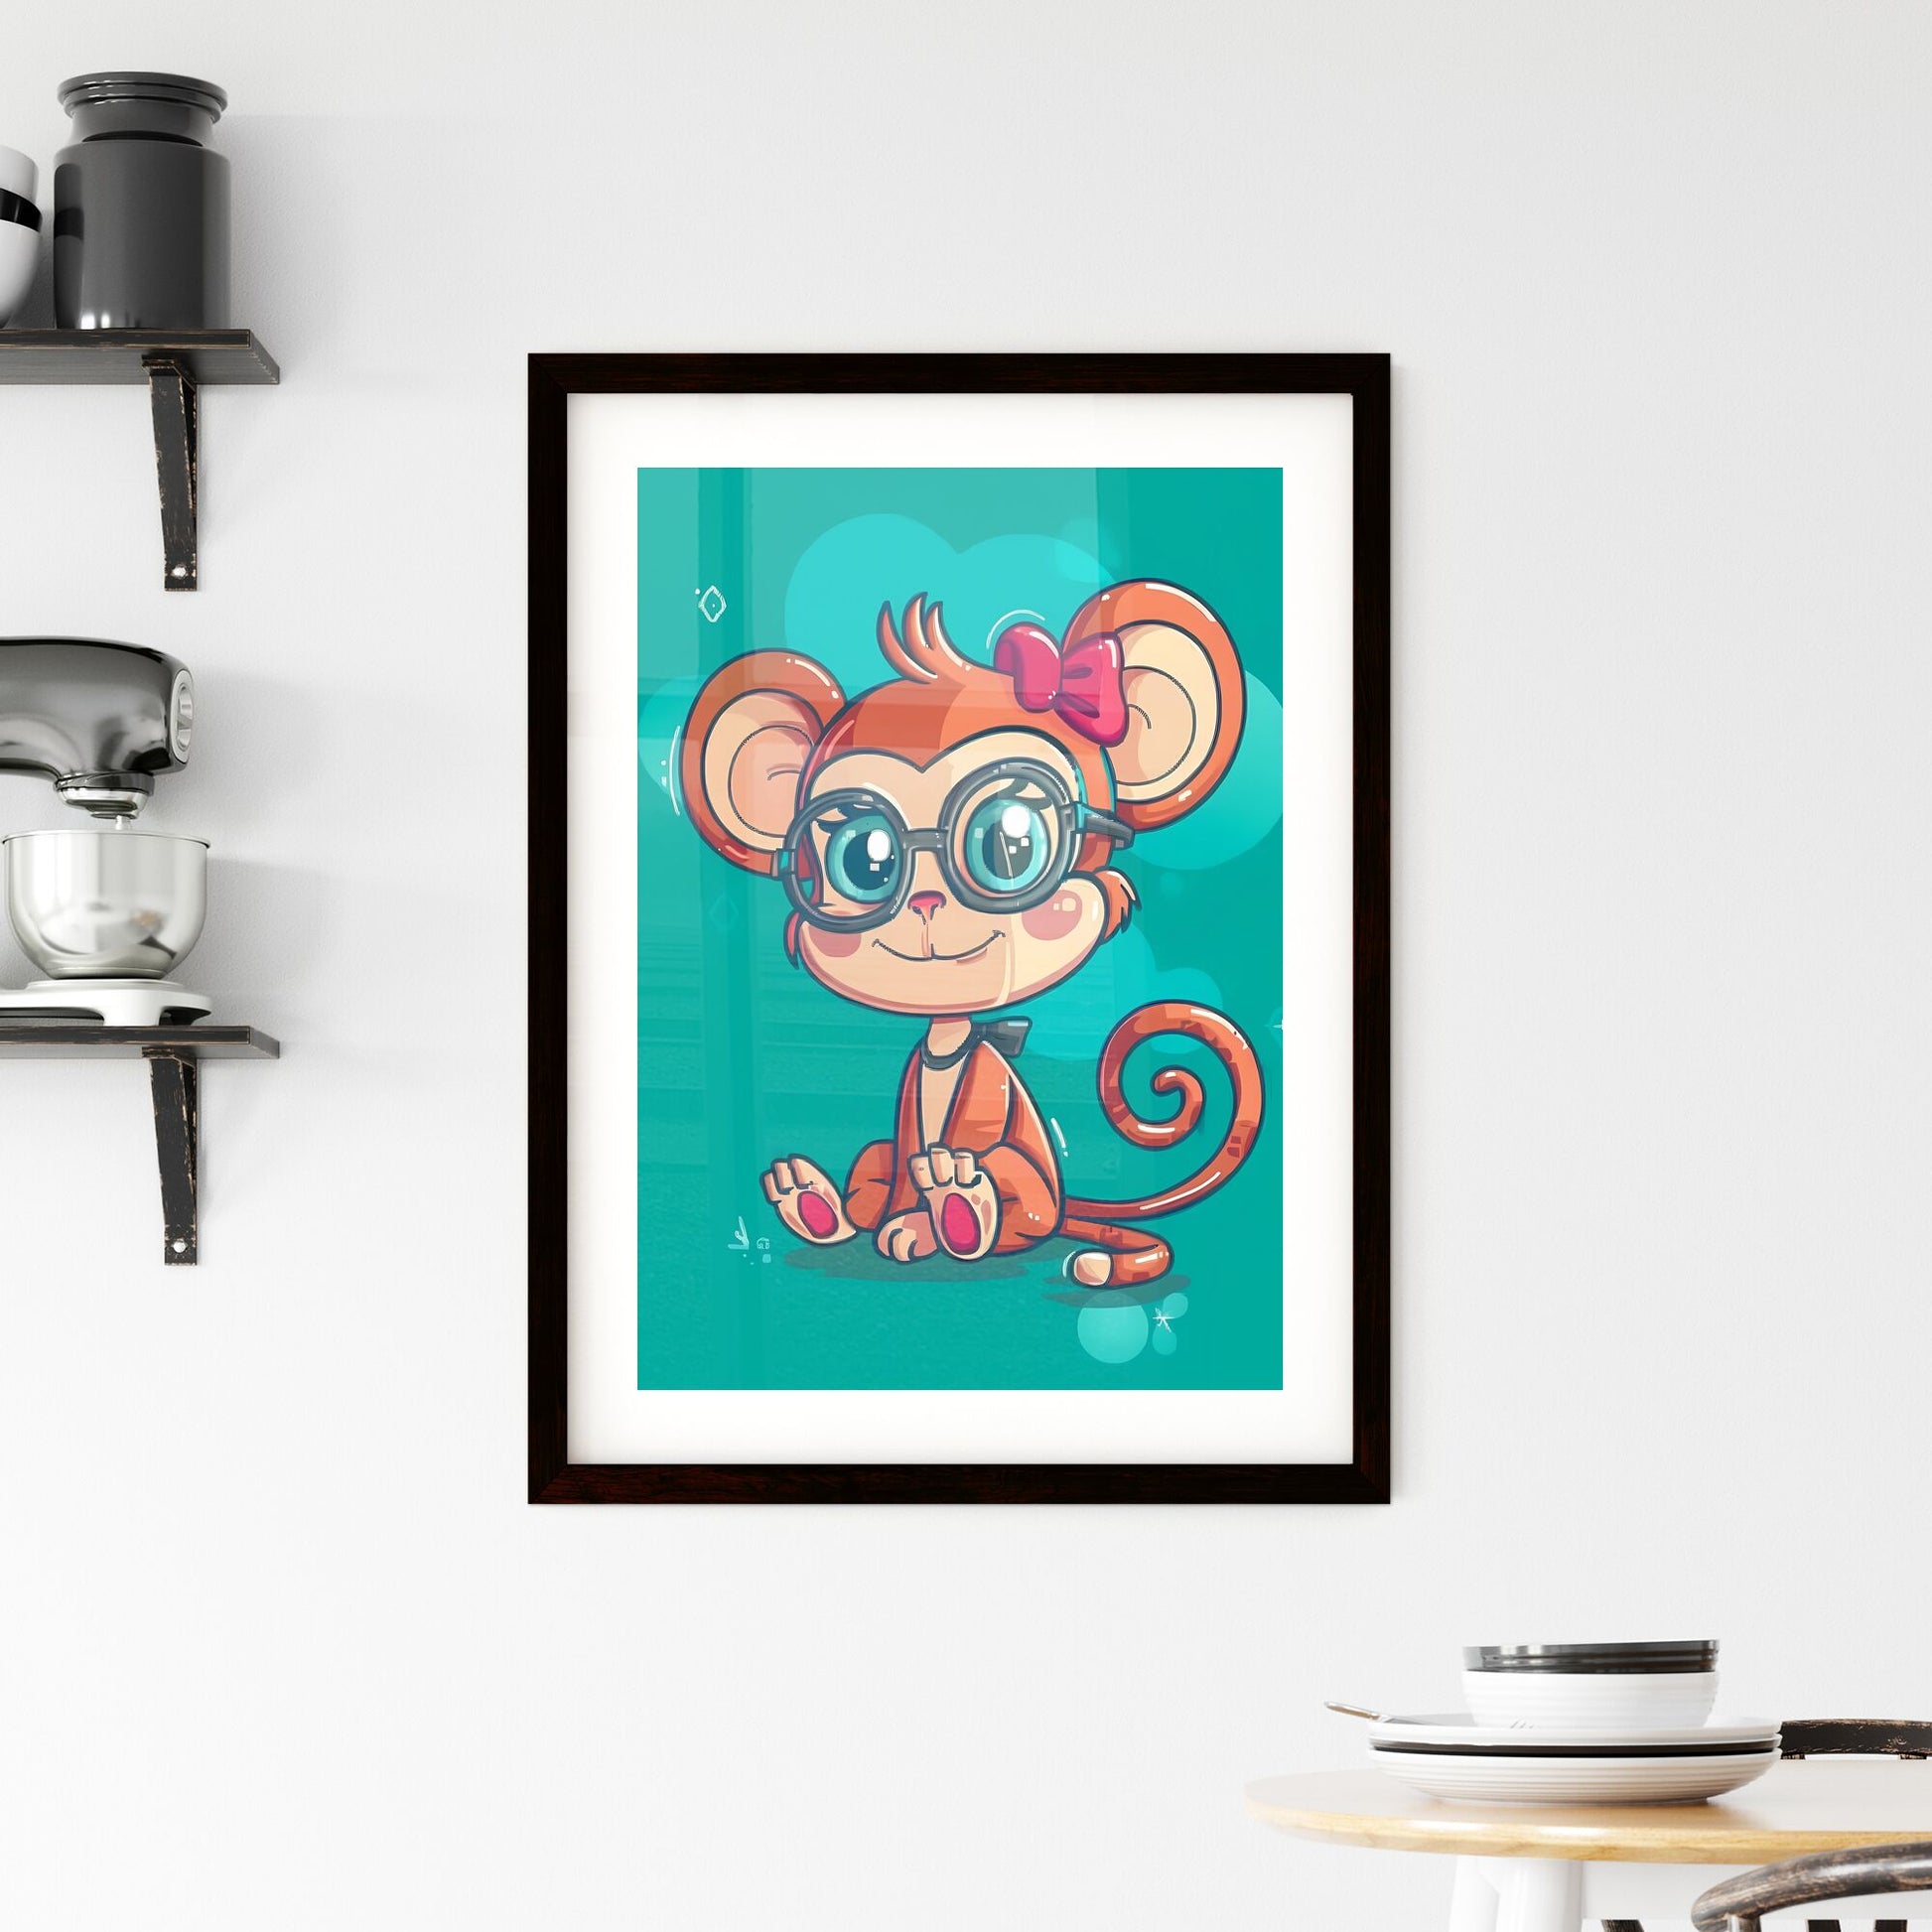 Colorful Kawaii Style Monkey Graphic: Vibrant Painting with Clear Outline and Cartoon Character Wearing Glasses and Bow Tie Default Title